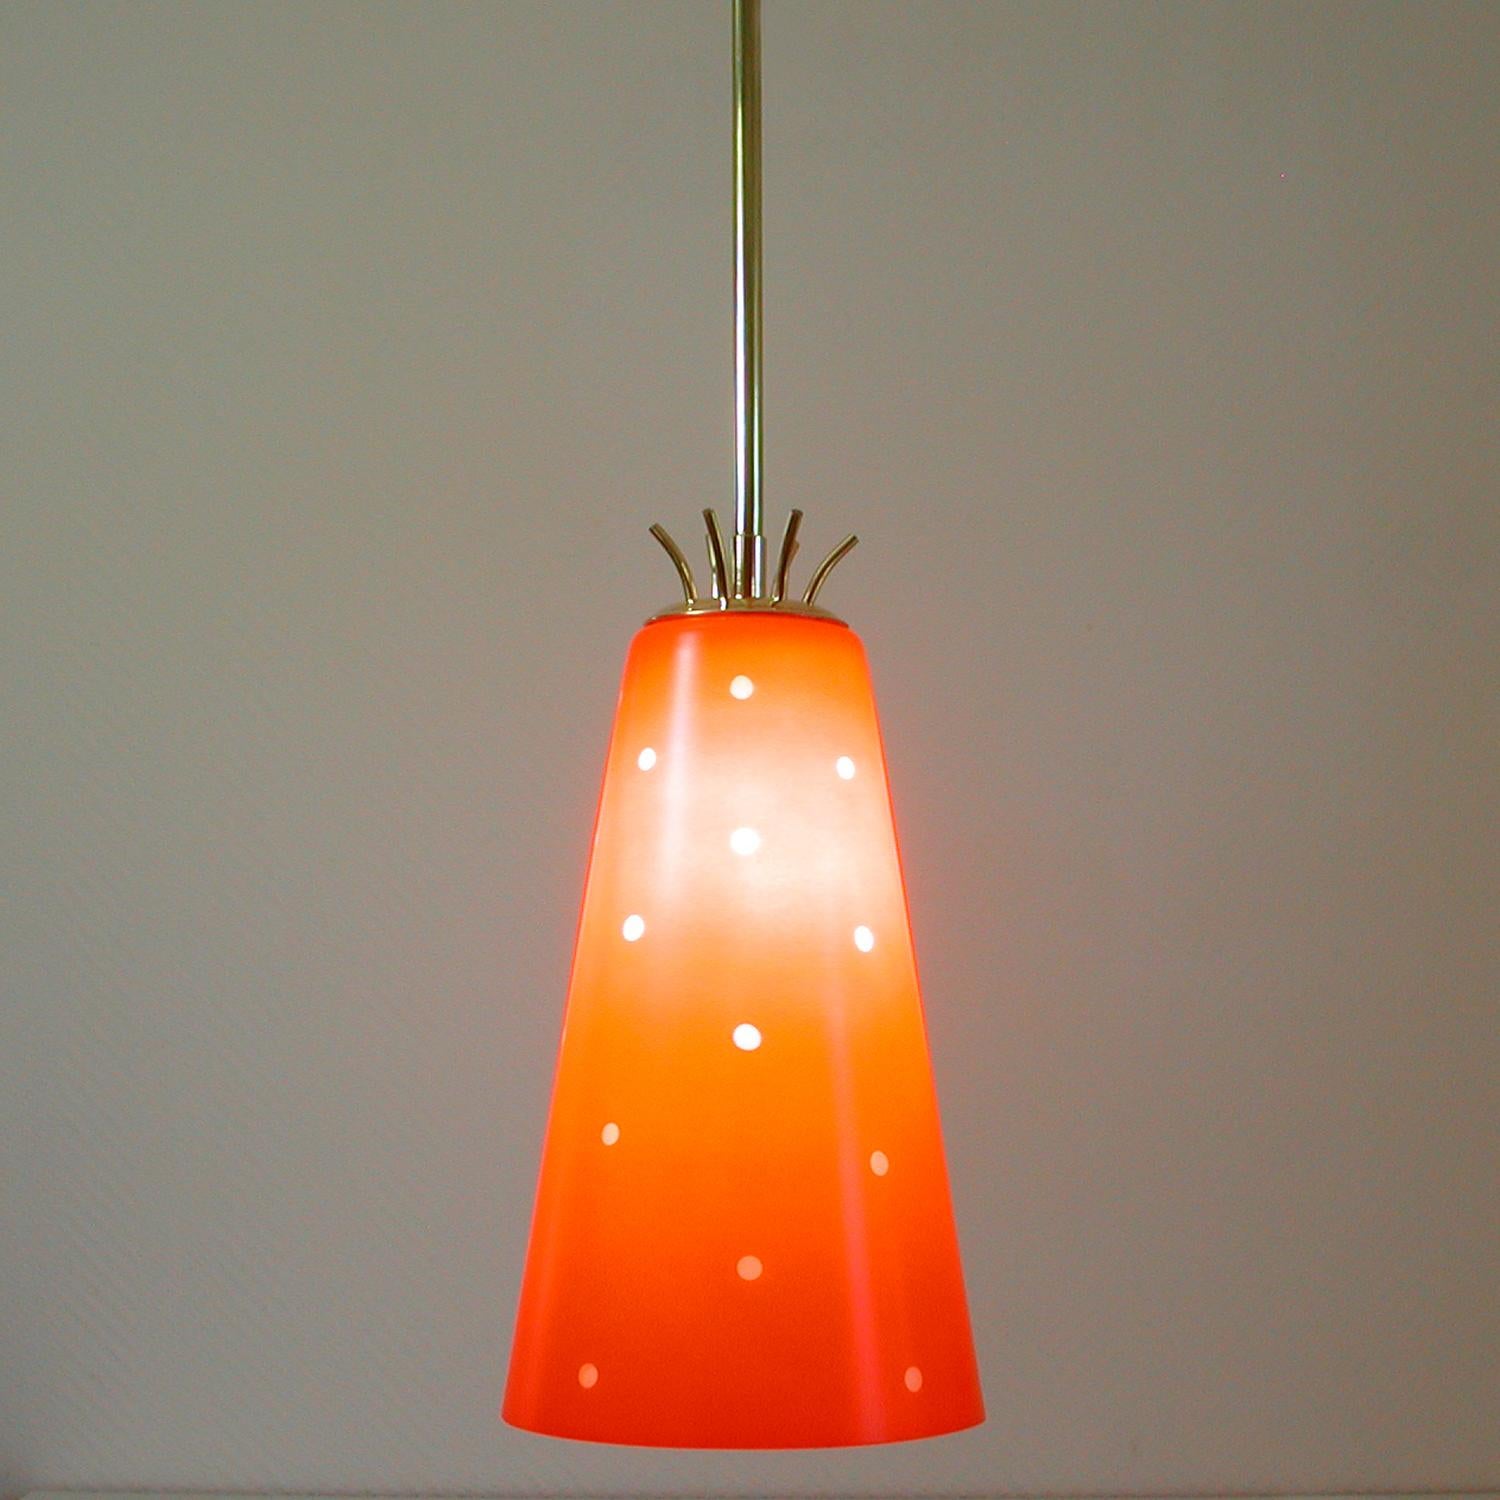 Scandinavian Midcentury Red Glass and Brass Pendant, 1950s For Sale 2